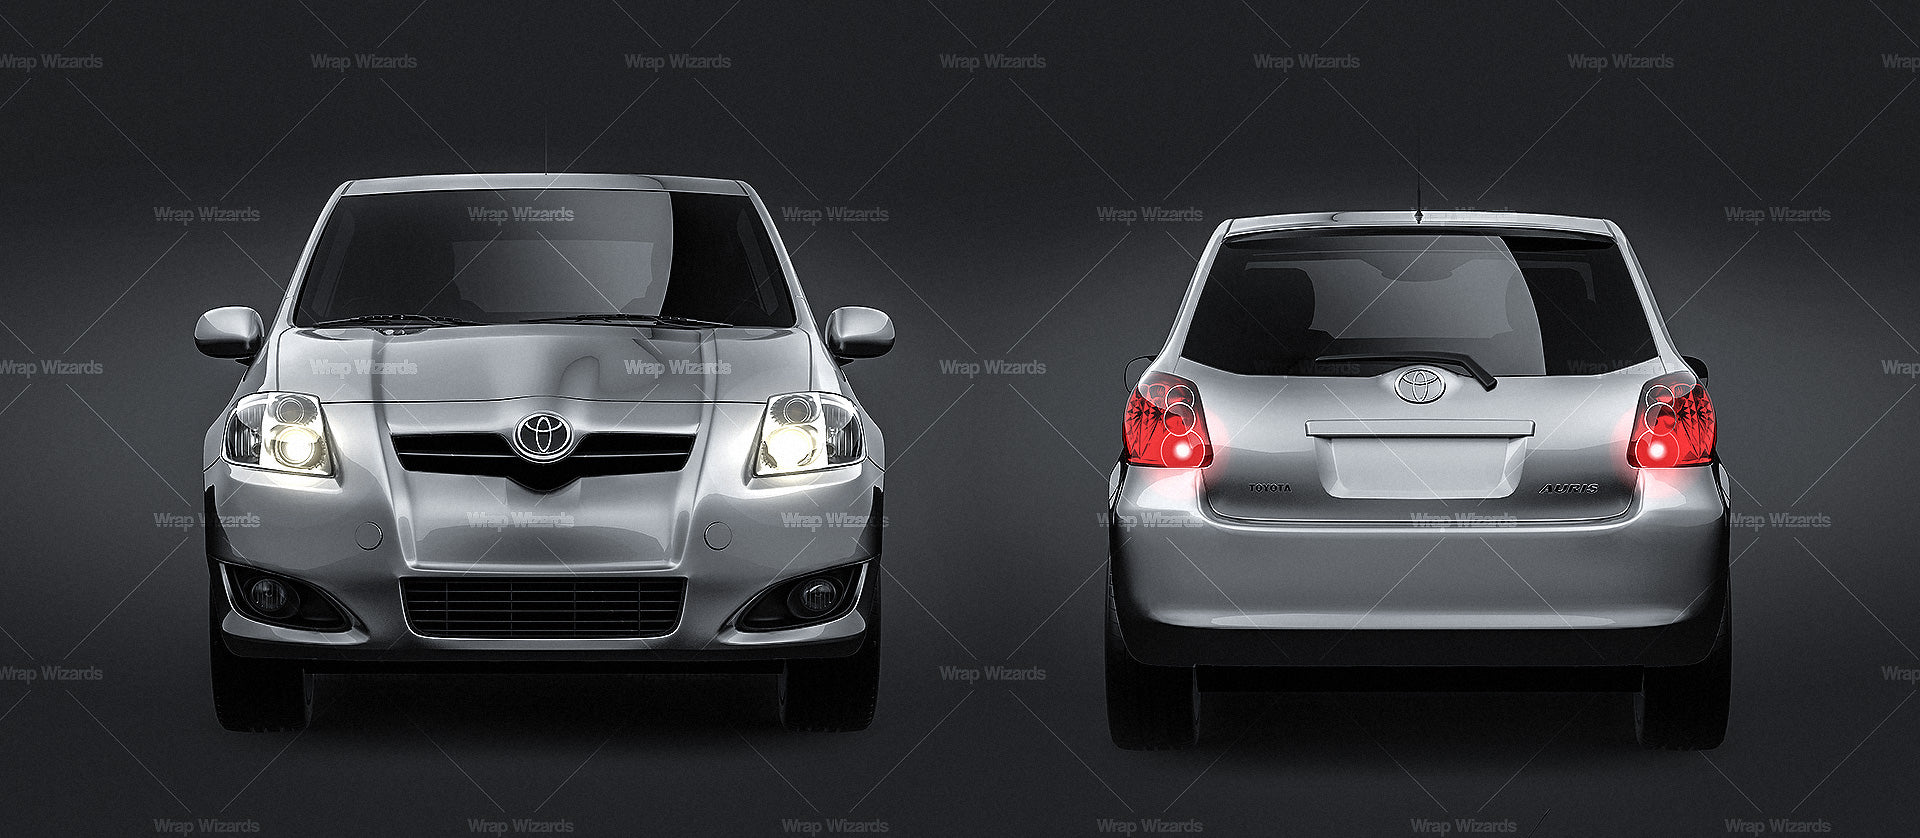 Toyota Auris 2007 glossy finish - all sides Car Mockup Template.psd